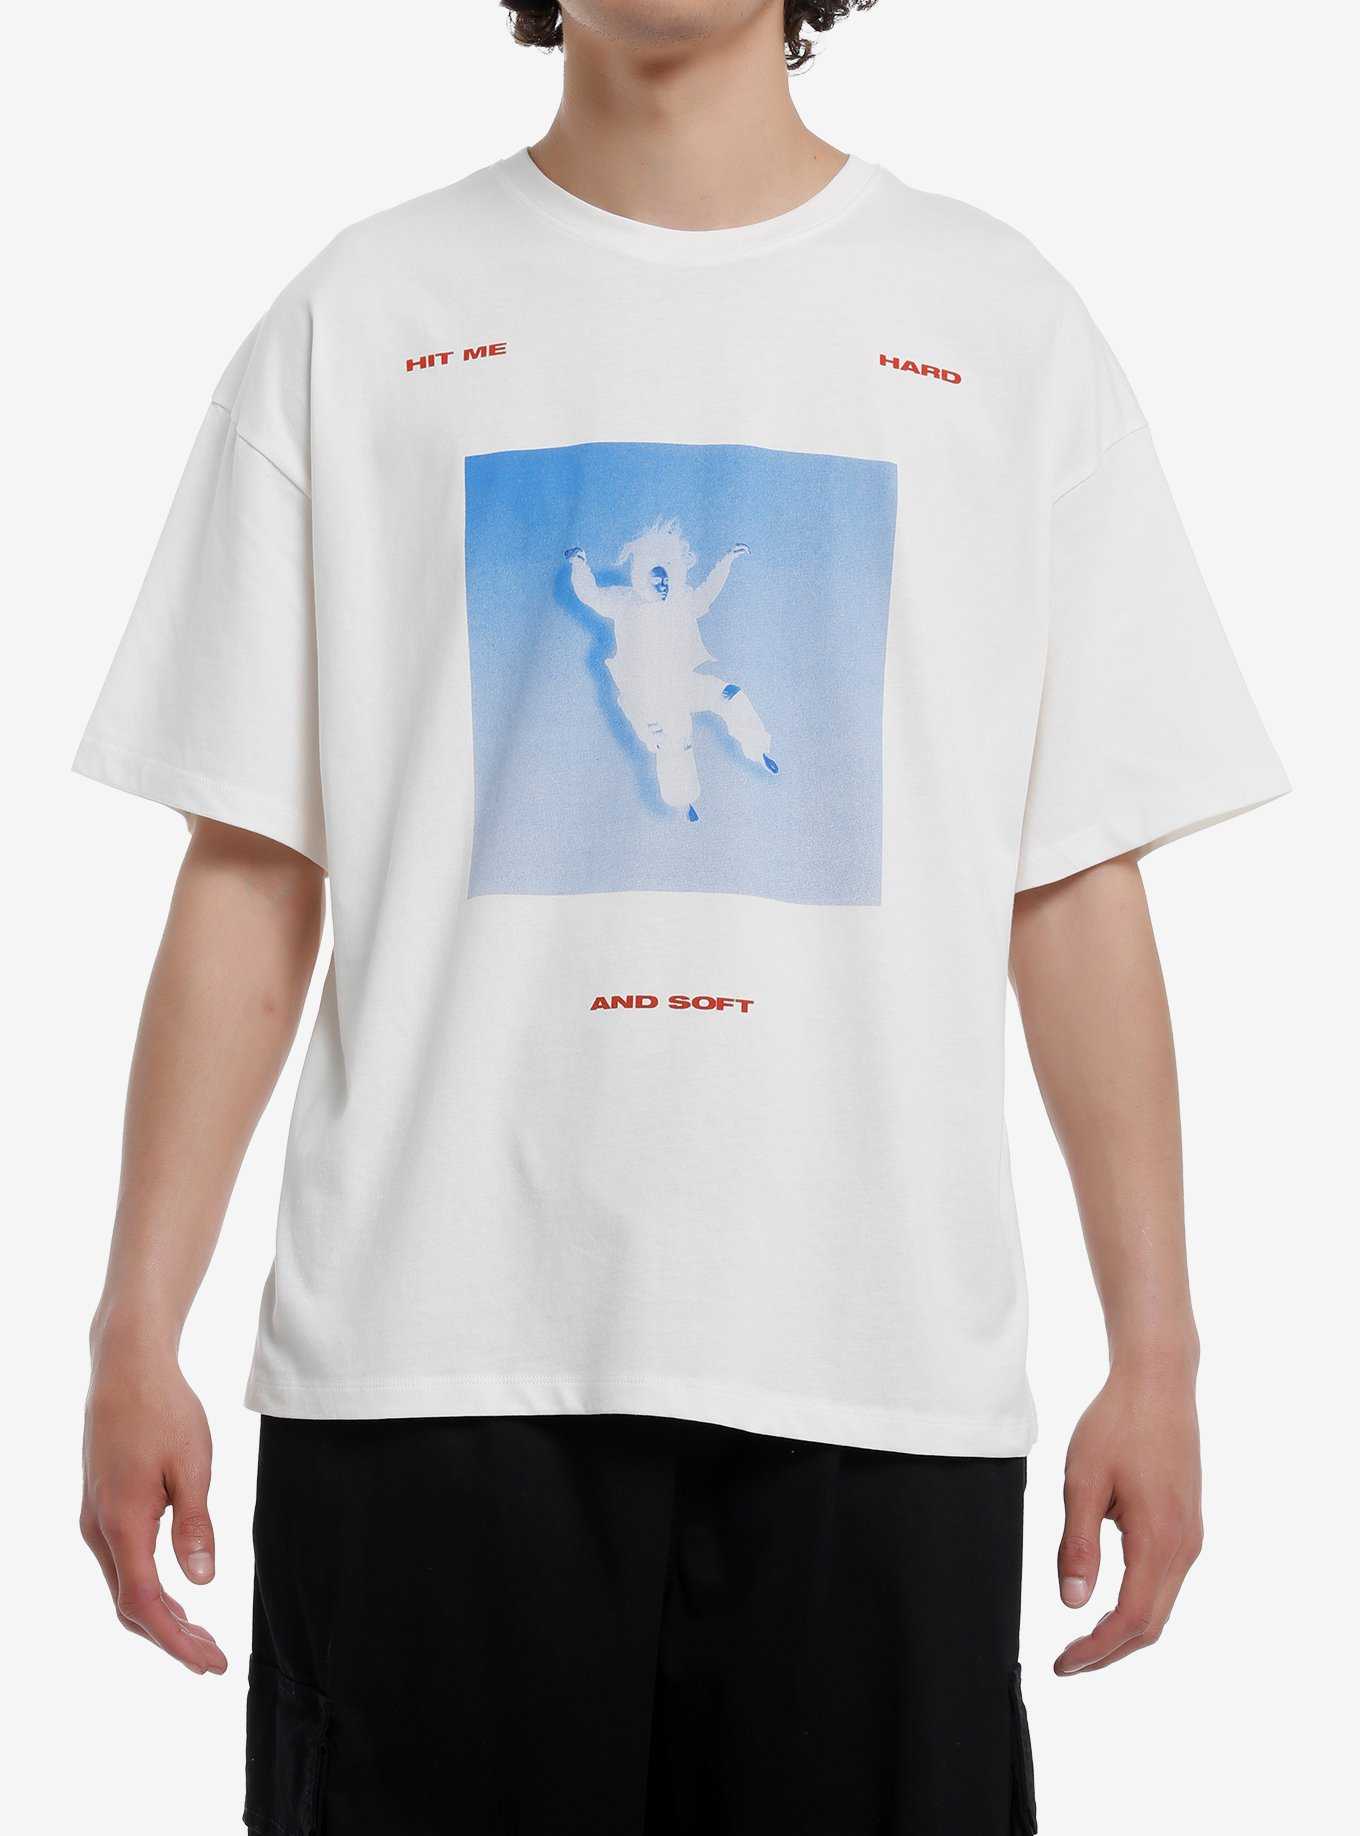 Billie Eilish Hit Me Hard And Soft Floating T-Shirt Hot Topic Exclusive, , hi-res